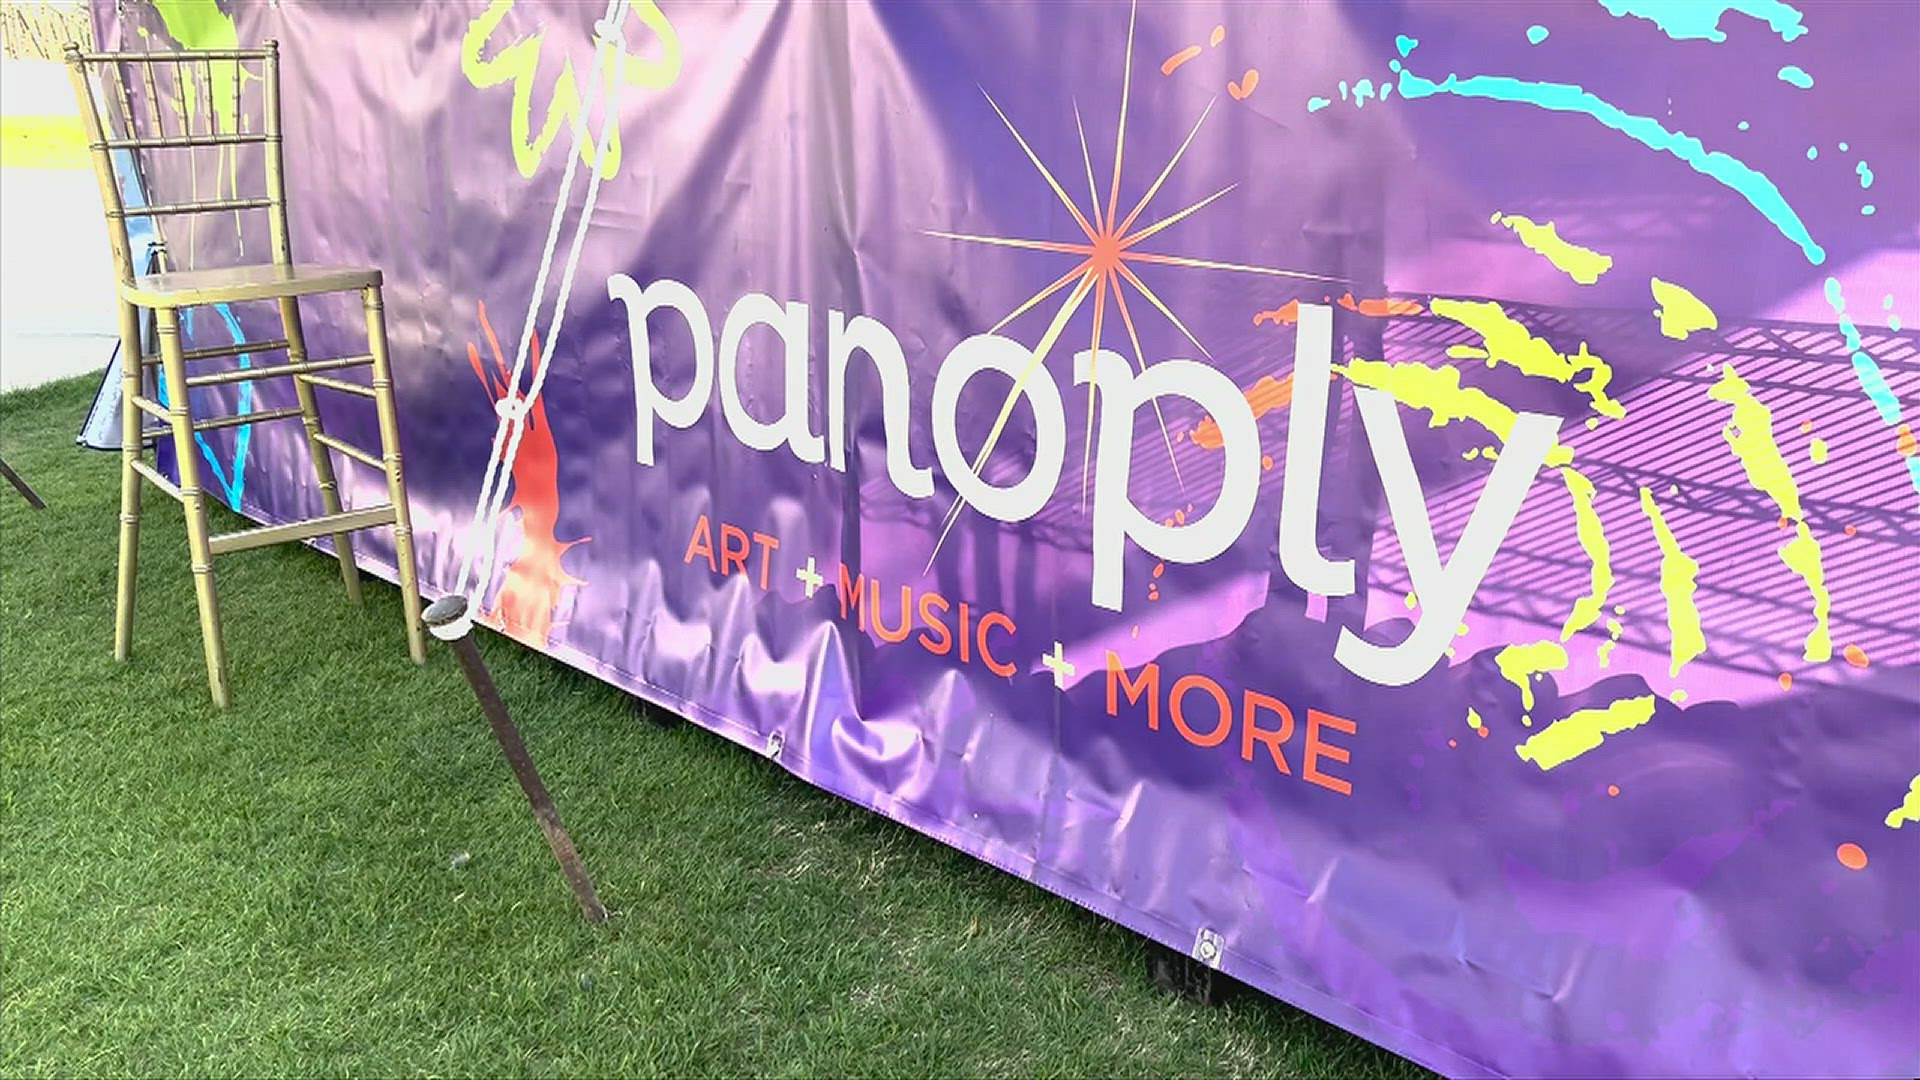 New interactive art installations and a "sensory friendly" zone are just two of the must-see activities at this year's Panoply Festival in Big Spring Park.